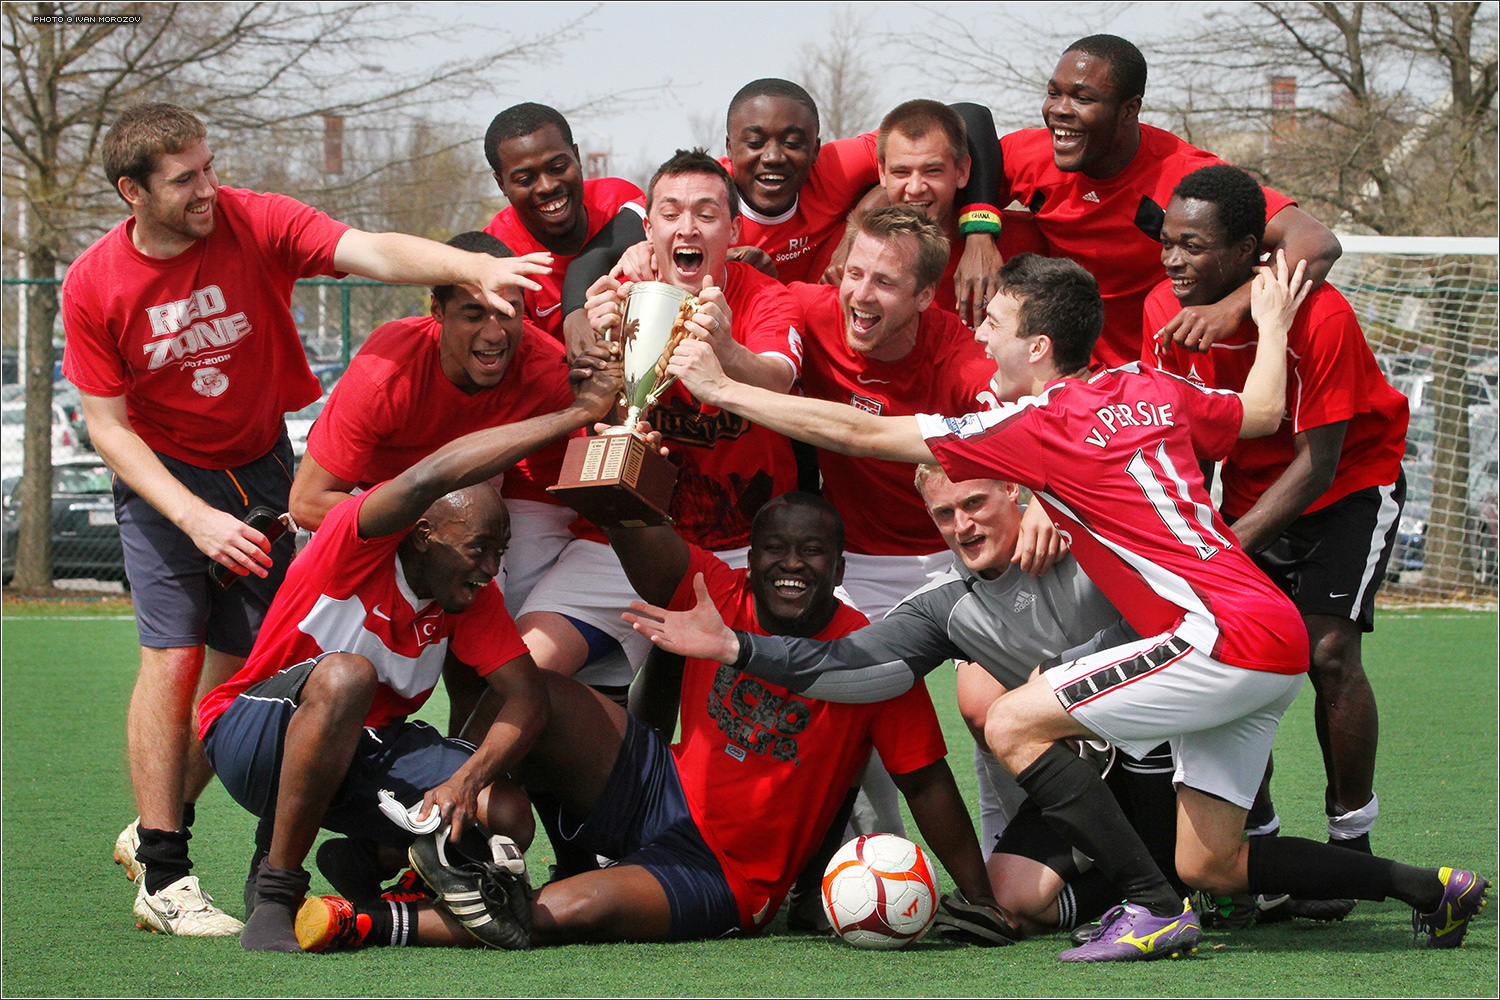 Soccer team poses with tournament trophy